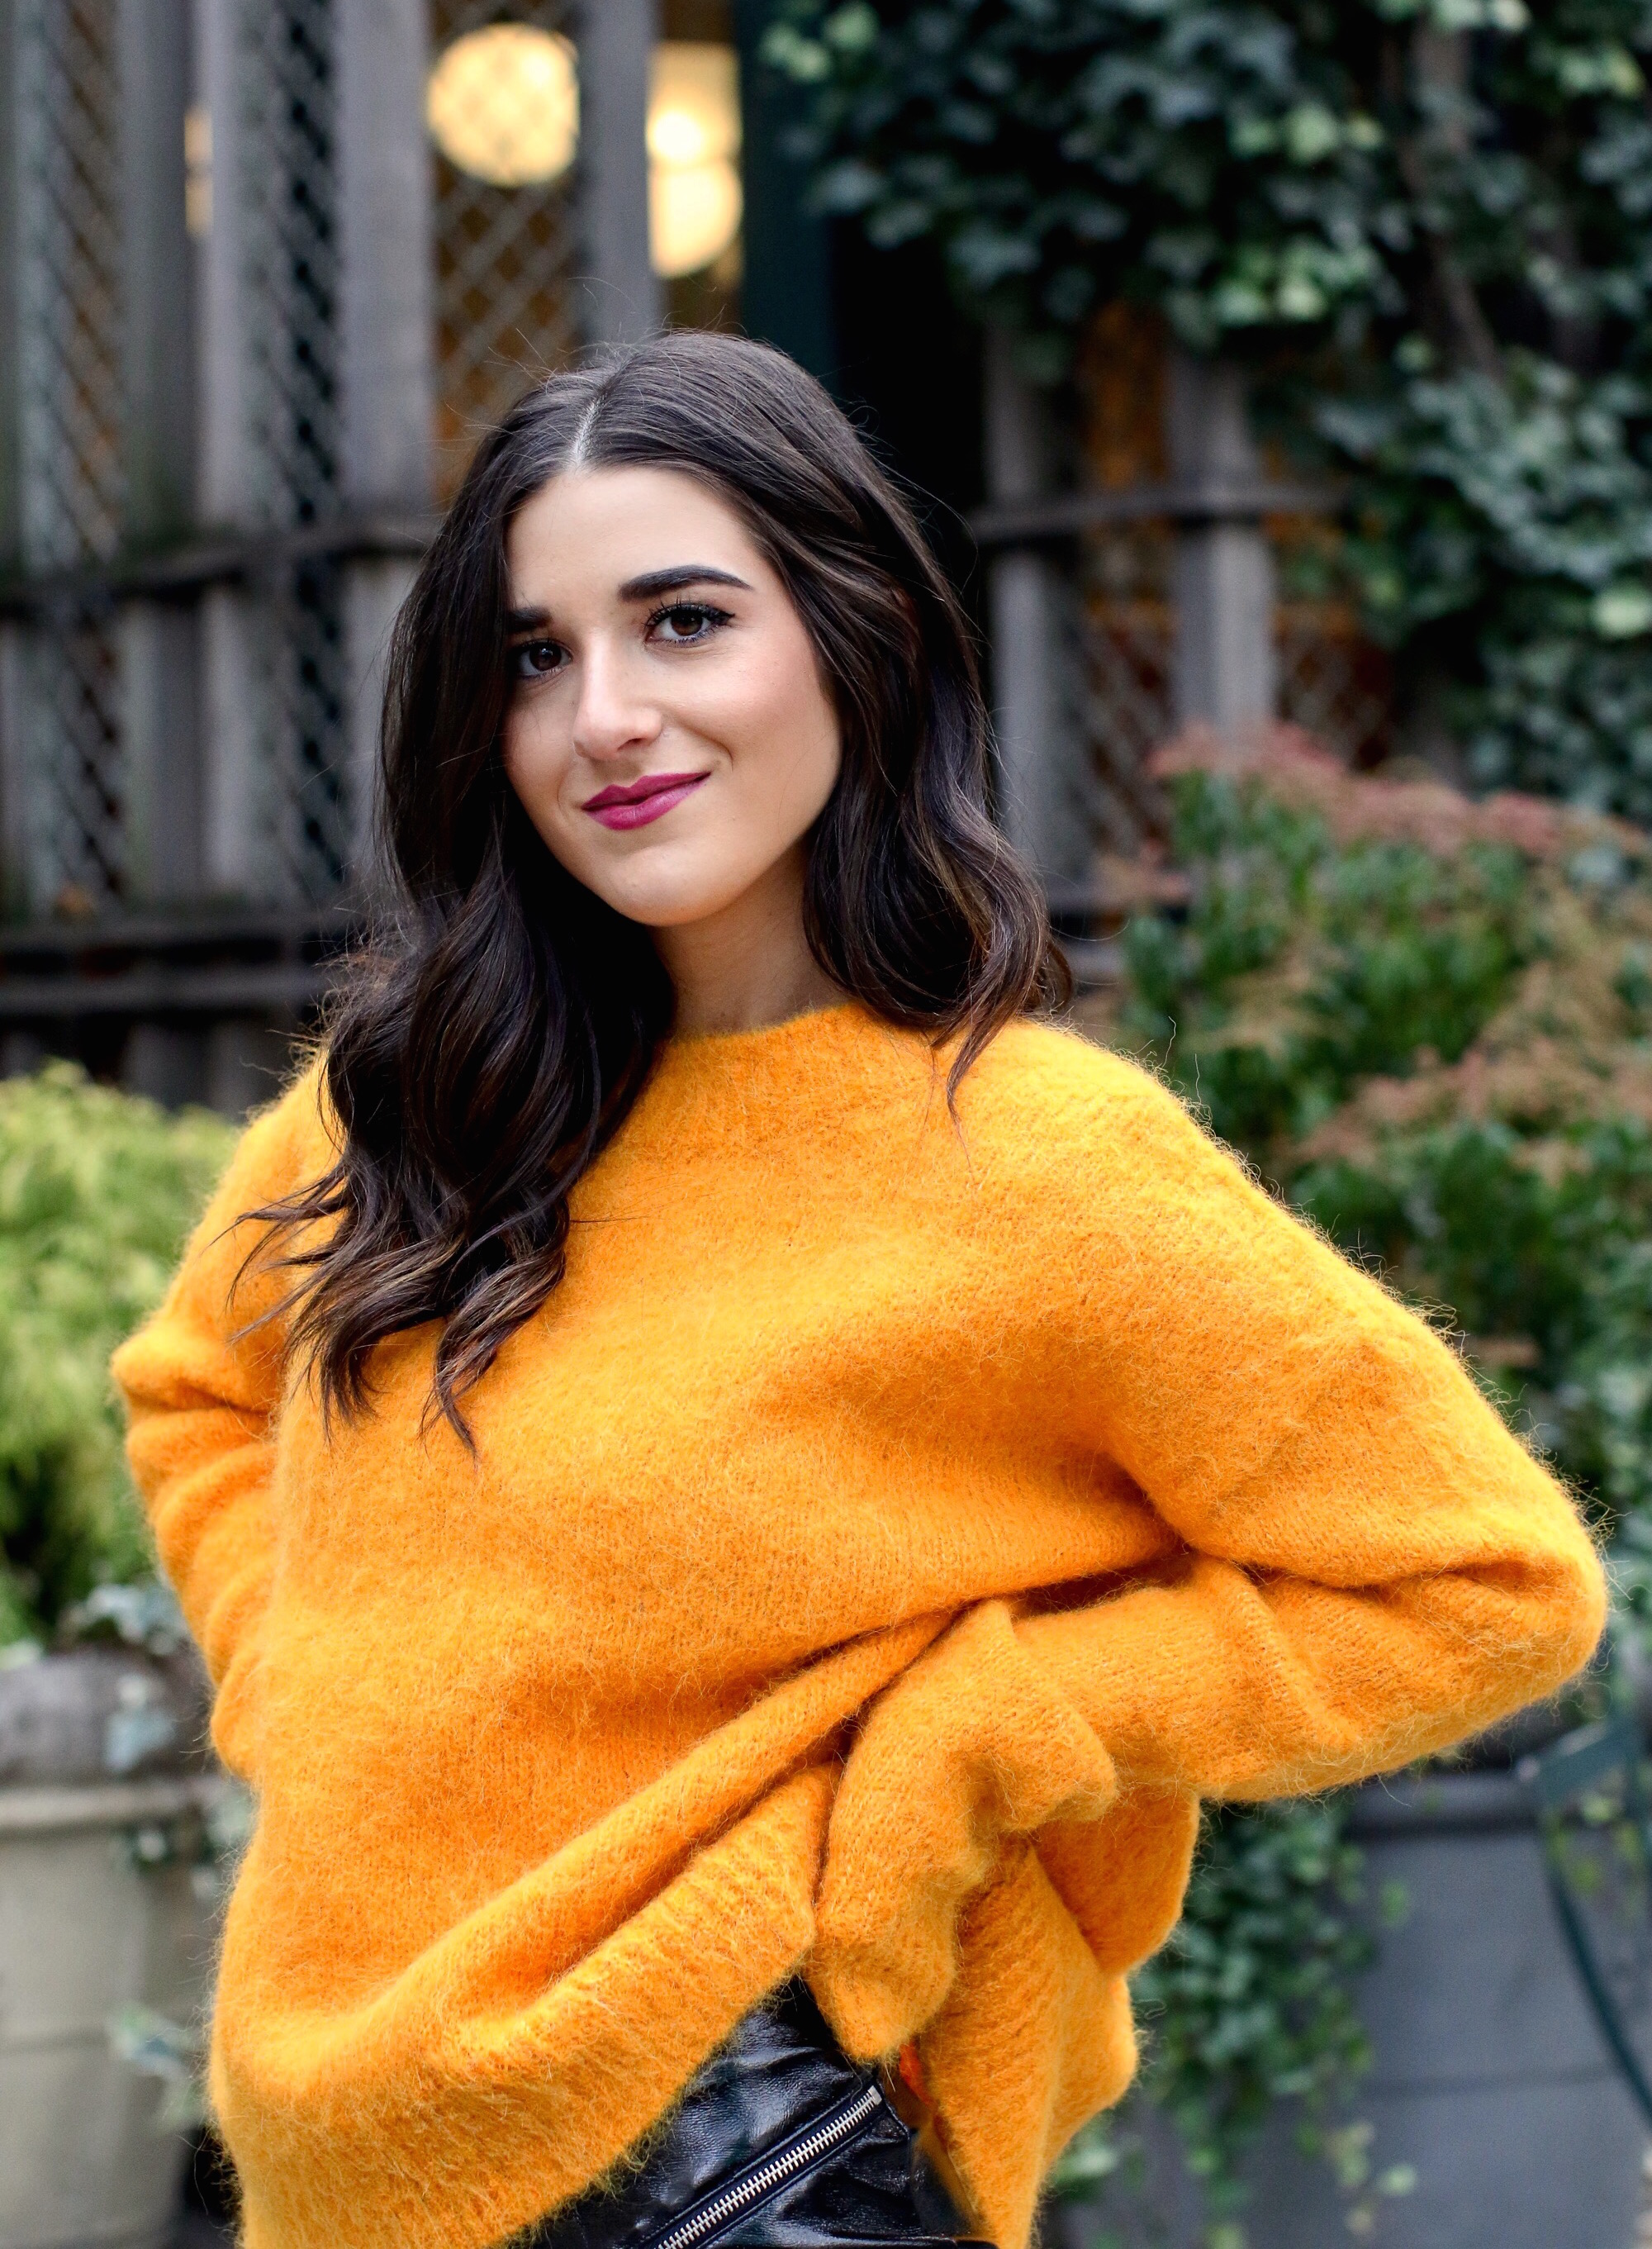 Yellow Sweater Pleather Skirt Why You Should Think Before You Unfollow Esther Santer Fashion Blog NYC Street Style Blogger Outfit OOTD Trendy Cozy Winter Look Girl Women Oversized Top New York City Instagram Tips DSW Studded Boots H&M Topshop Details.jpg